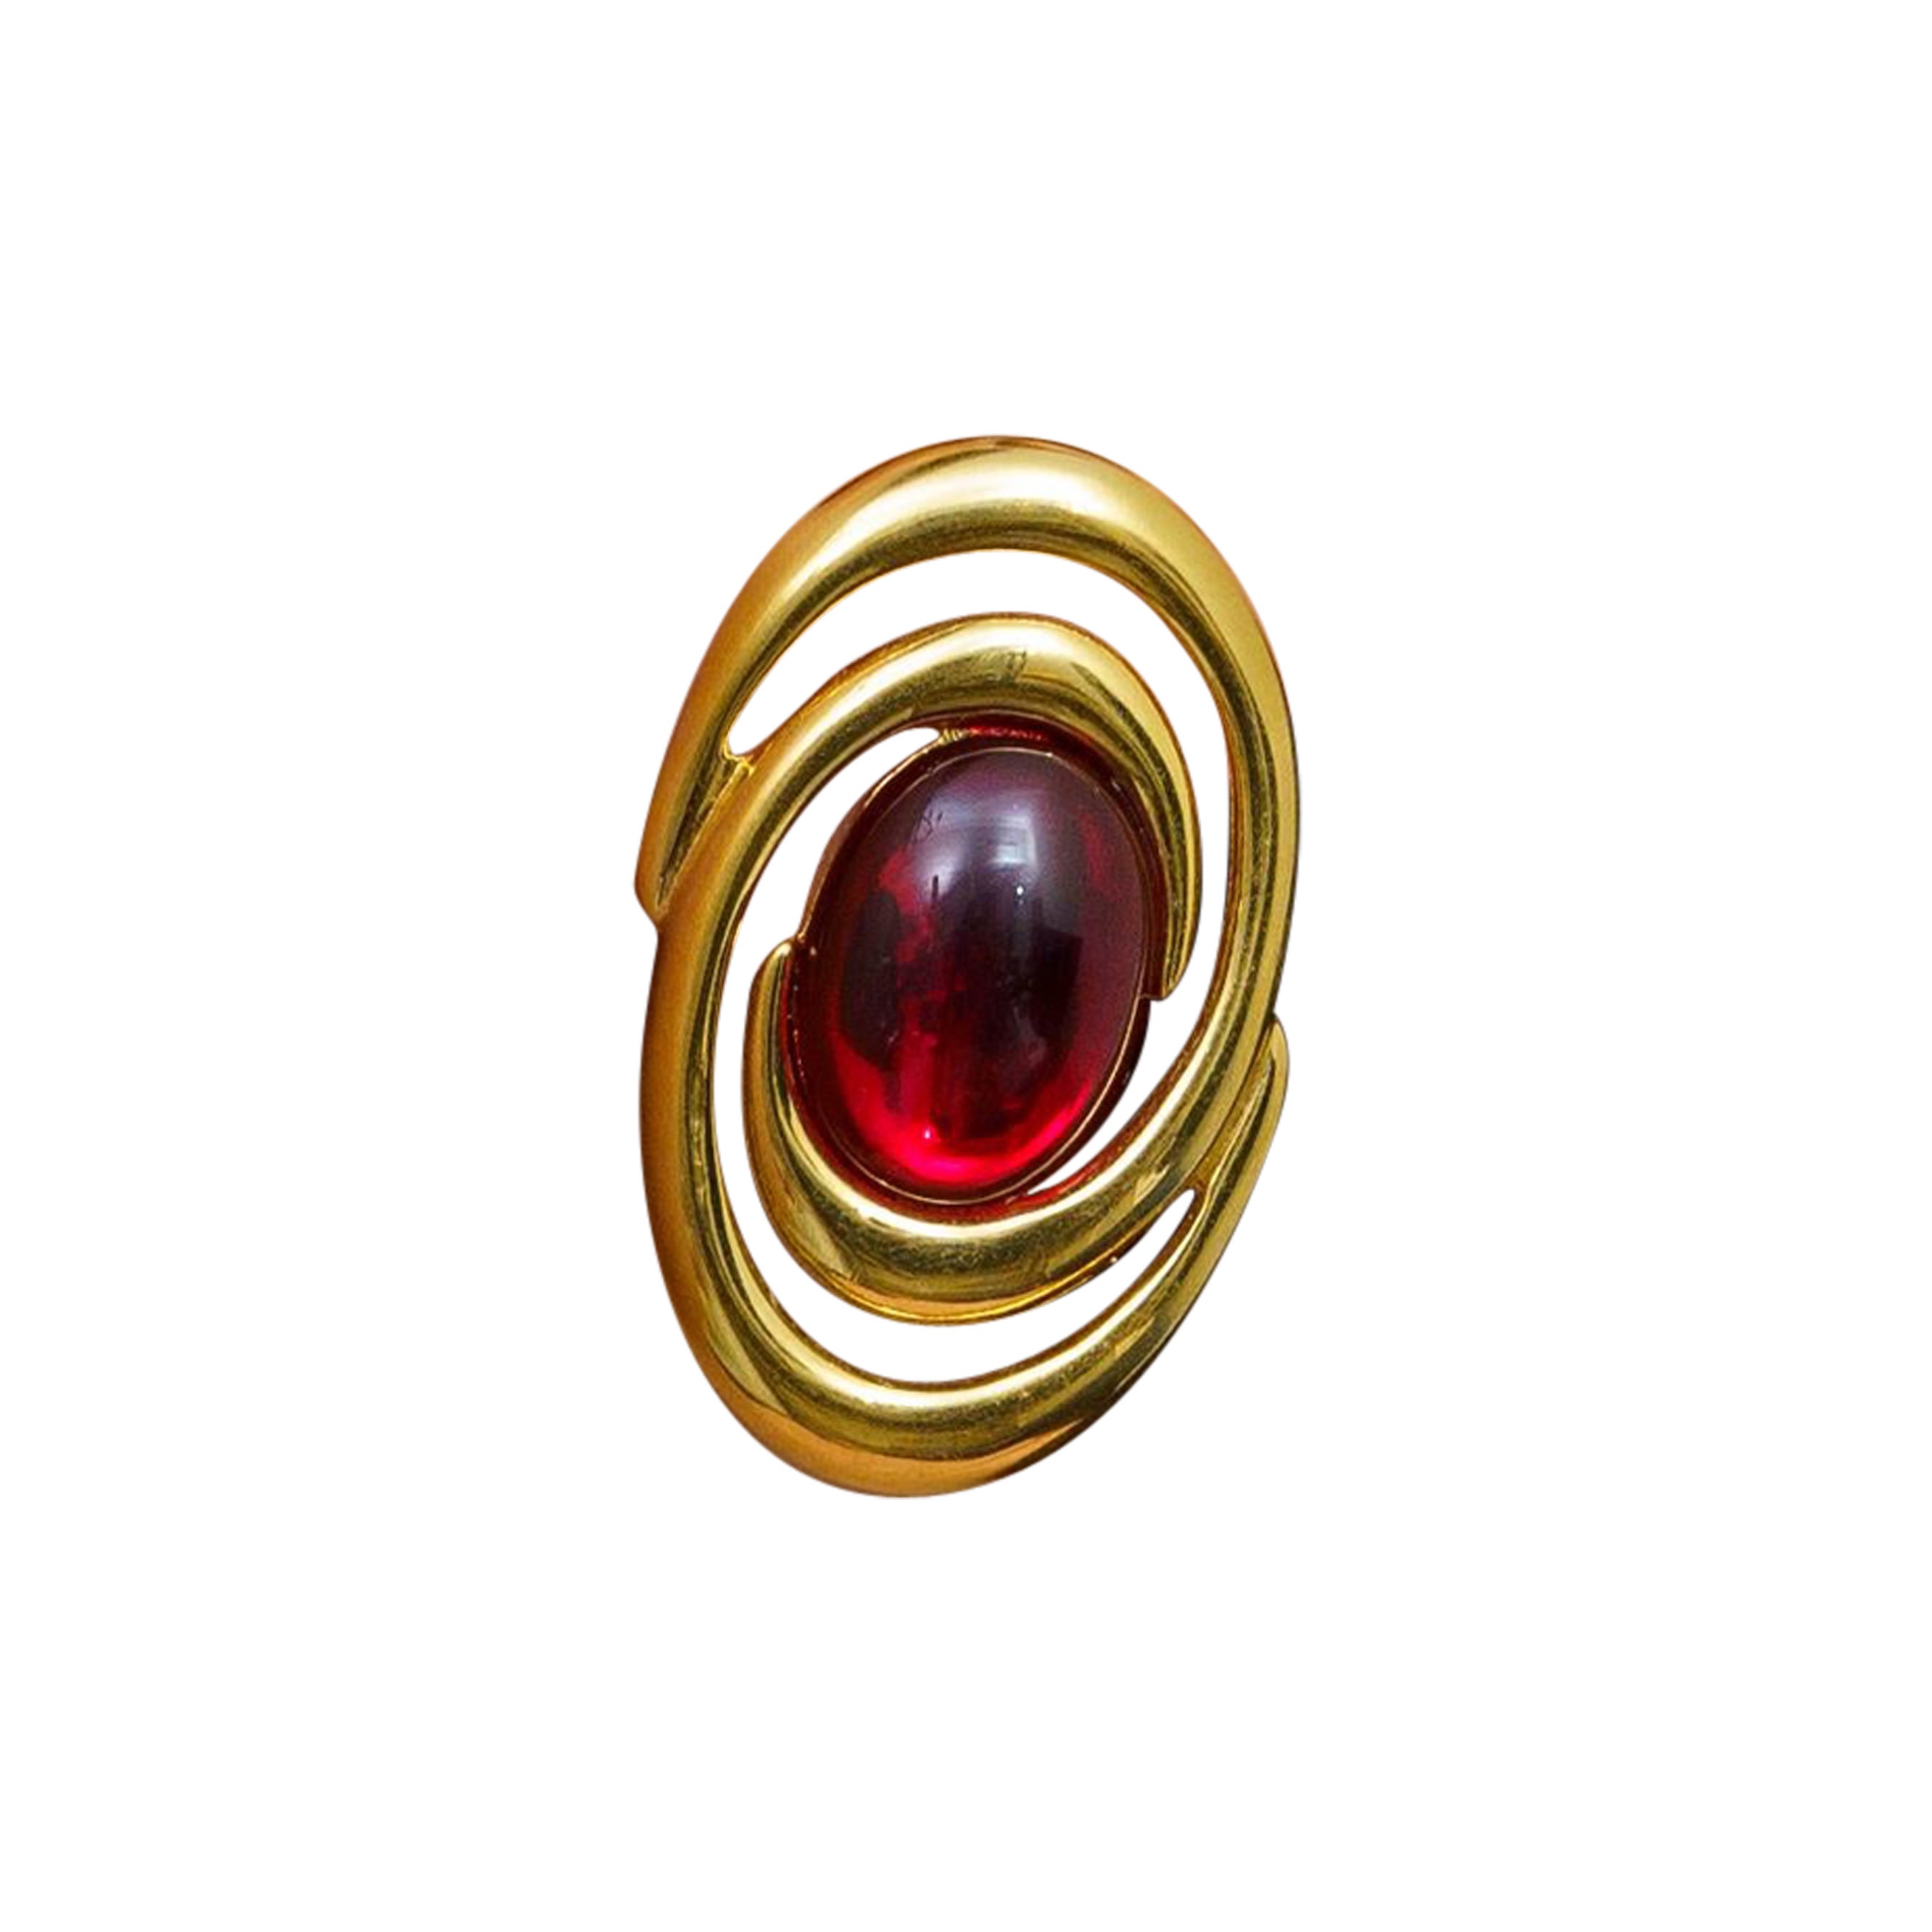 Vintage Napier Swirl Red Glass Ear clips offer timeless beauty, bestowing upon the wearer a signature of quality. These luxurious adornments lend a hint of sophistication and poise to any ensemble, elevating any look to a level of